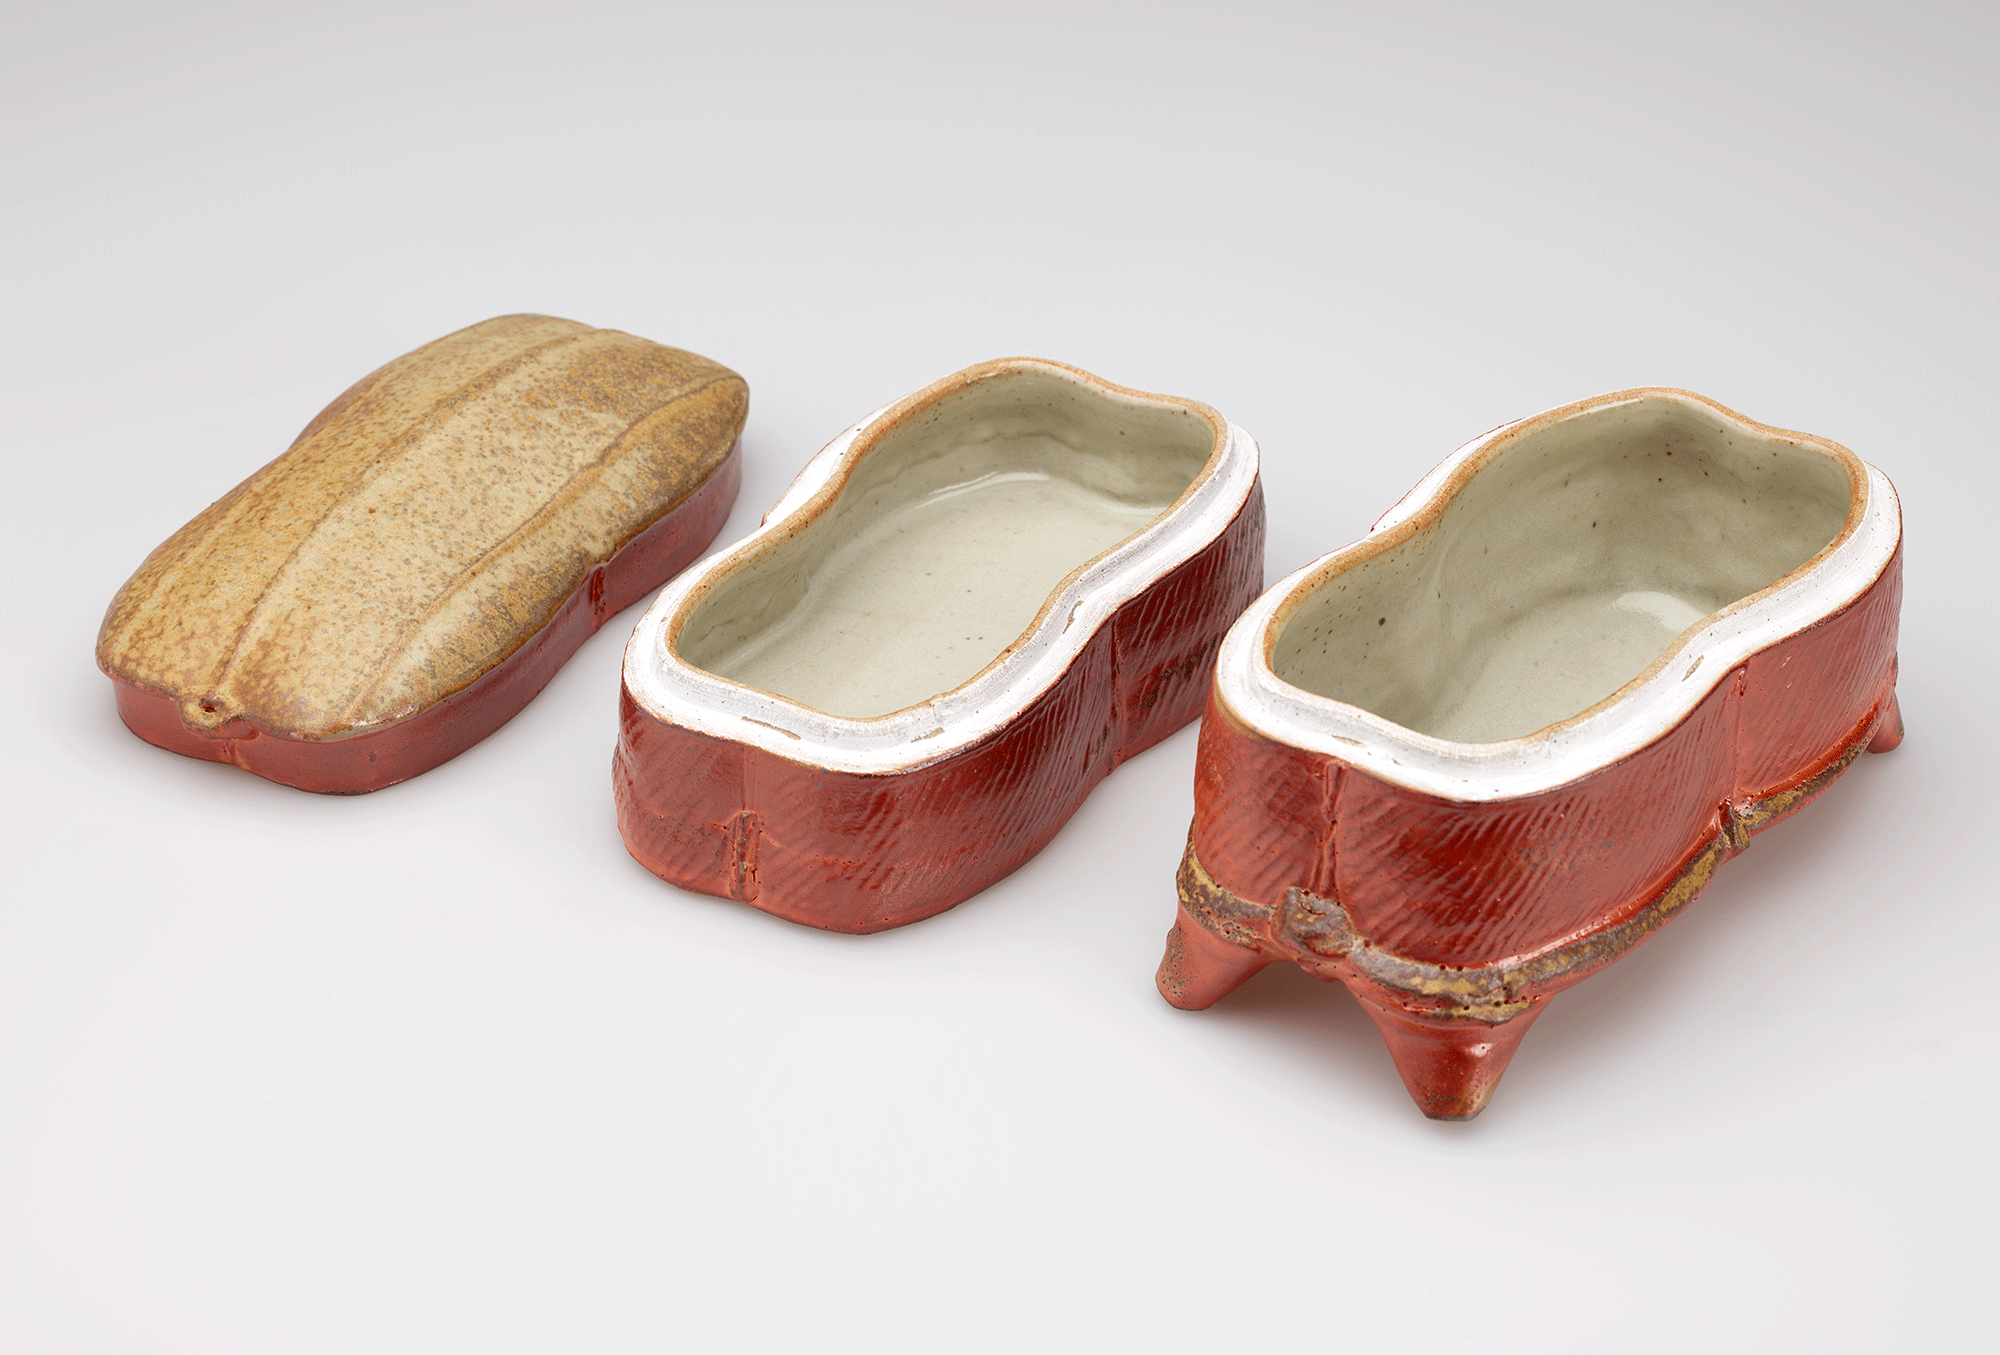 A rust-colored box with a light colored interior, triangular feet, and a tan top disassembled into three parts